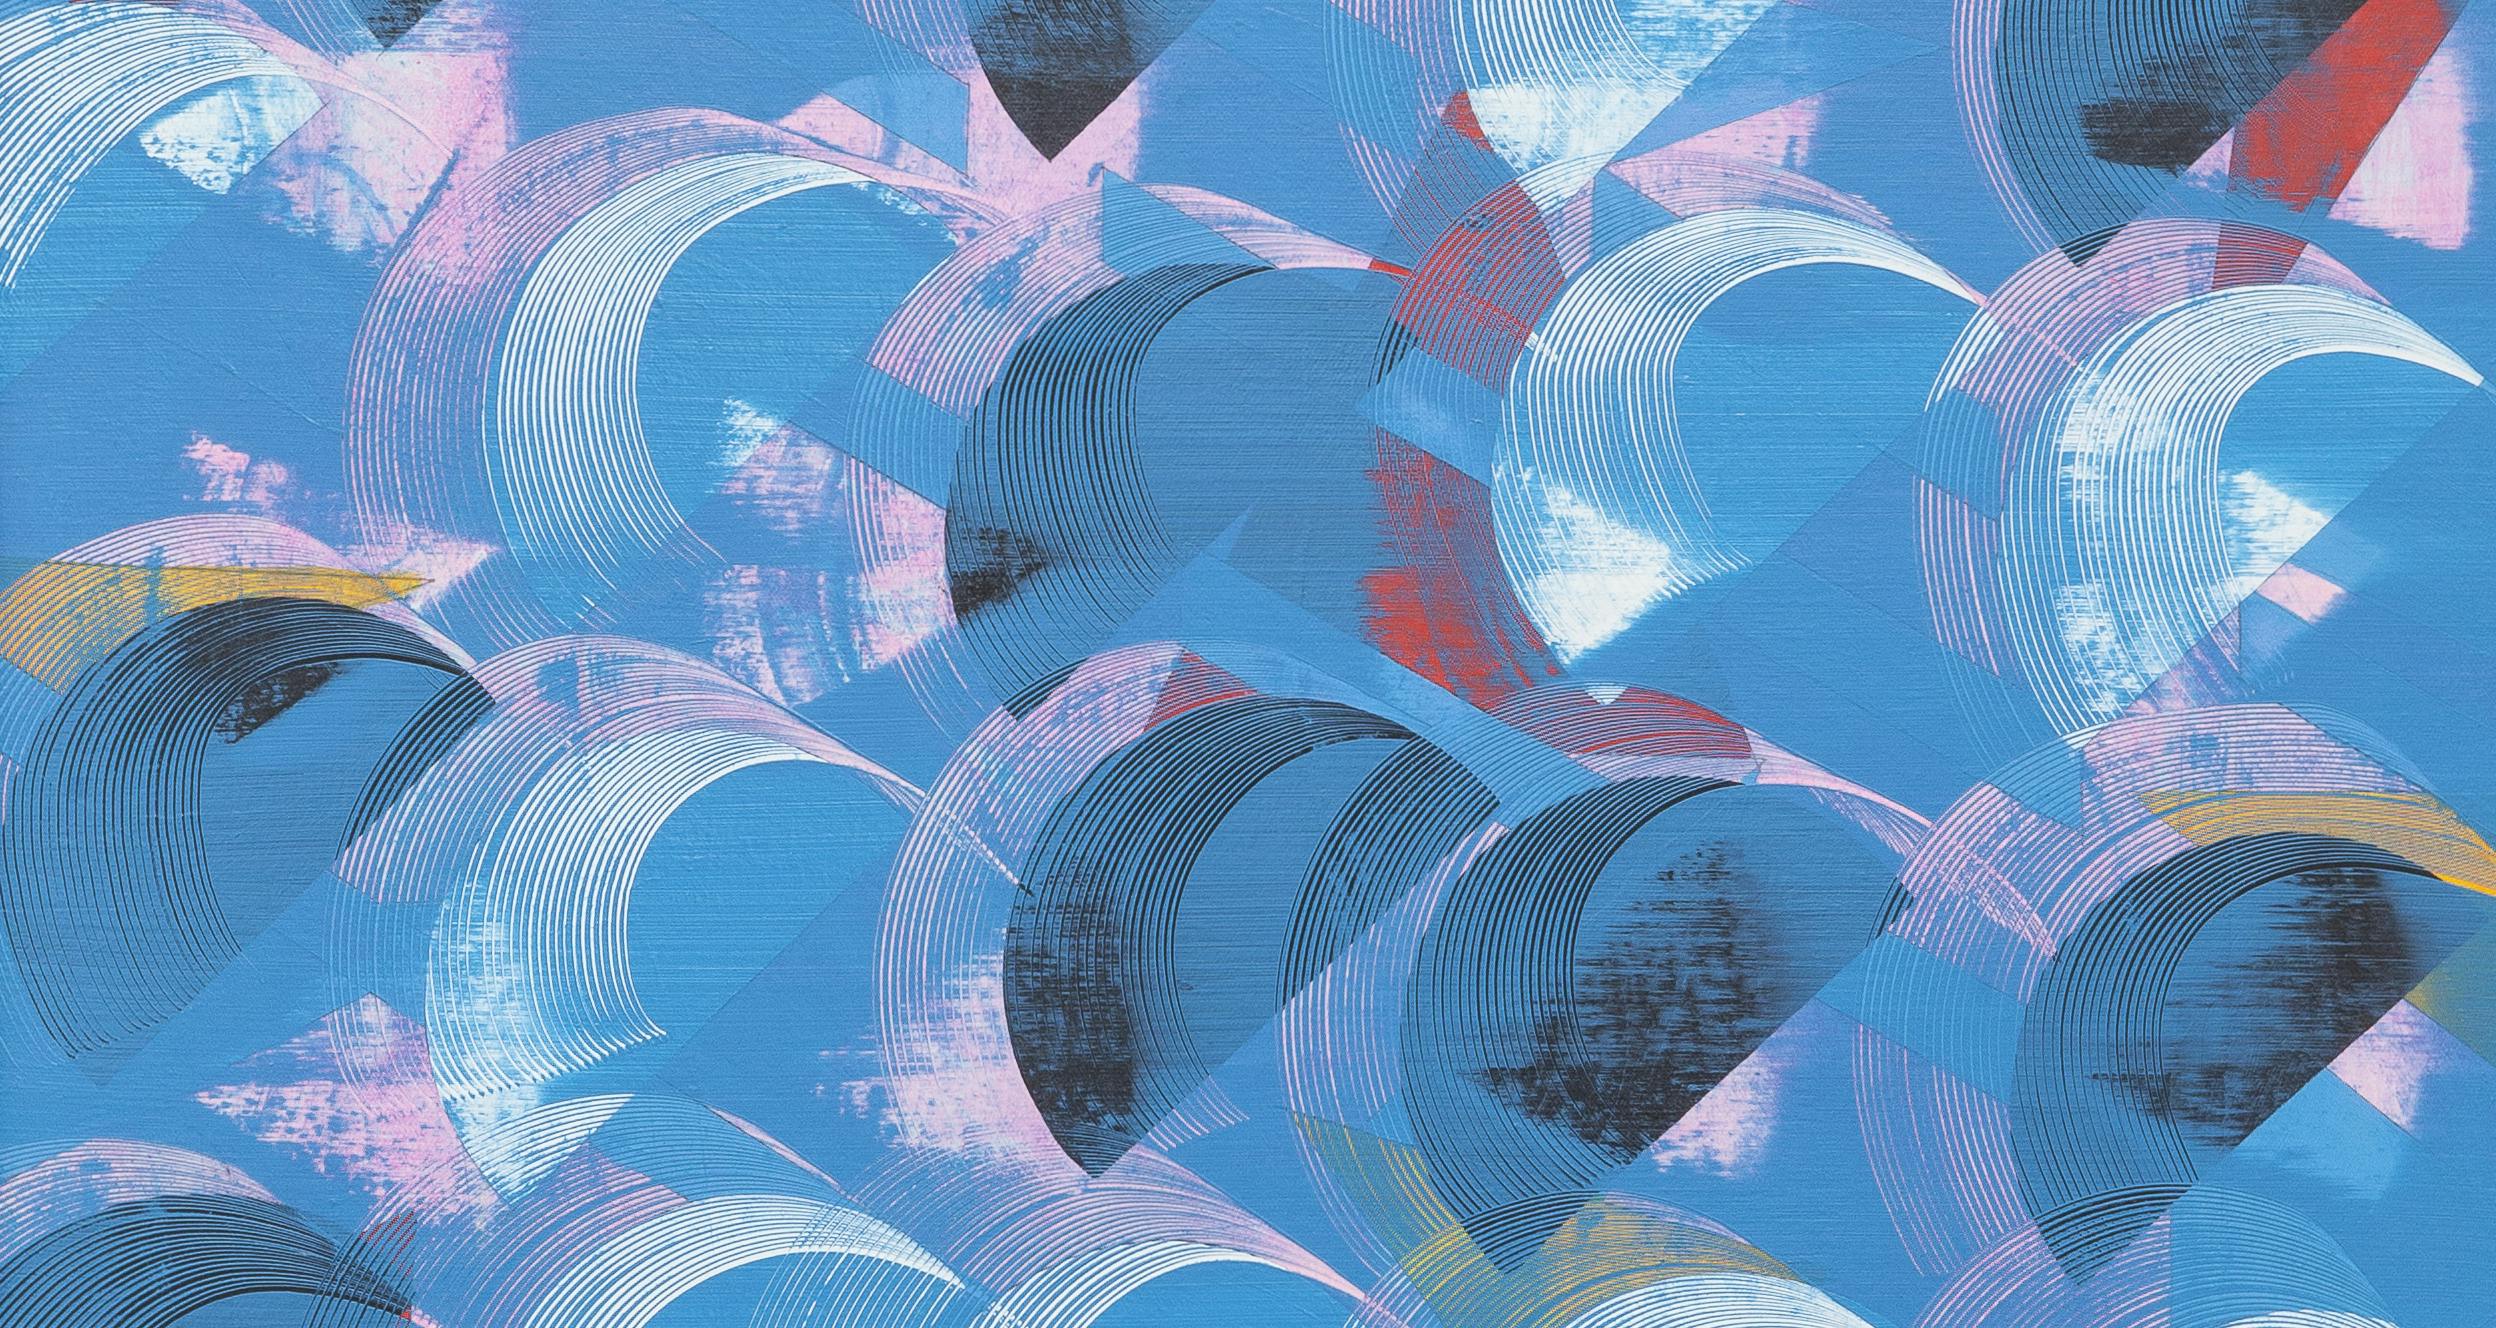 A close up view of an abstracting painting. The painting is made up of a repeating pattern of mainly pink, blue, black, and white crescent moon-like shaped brushstrokes. 